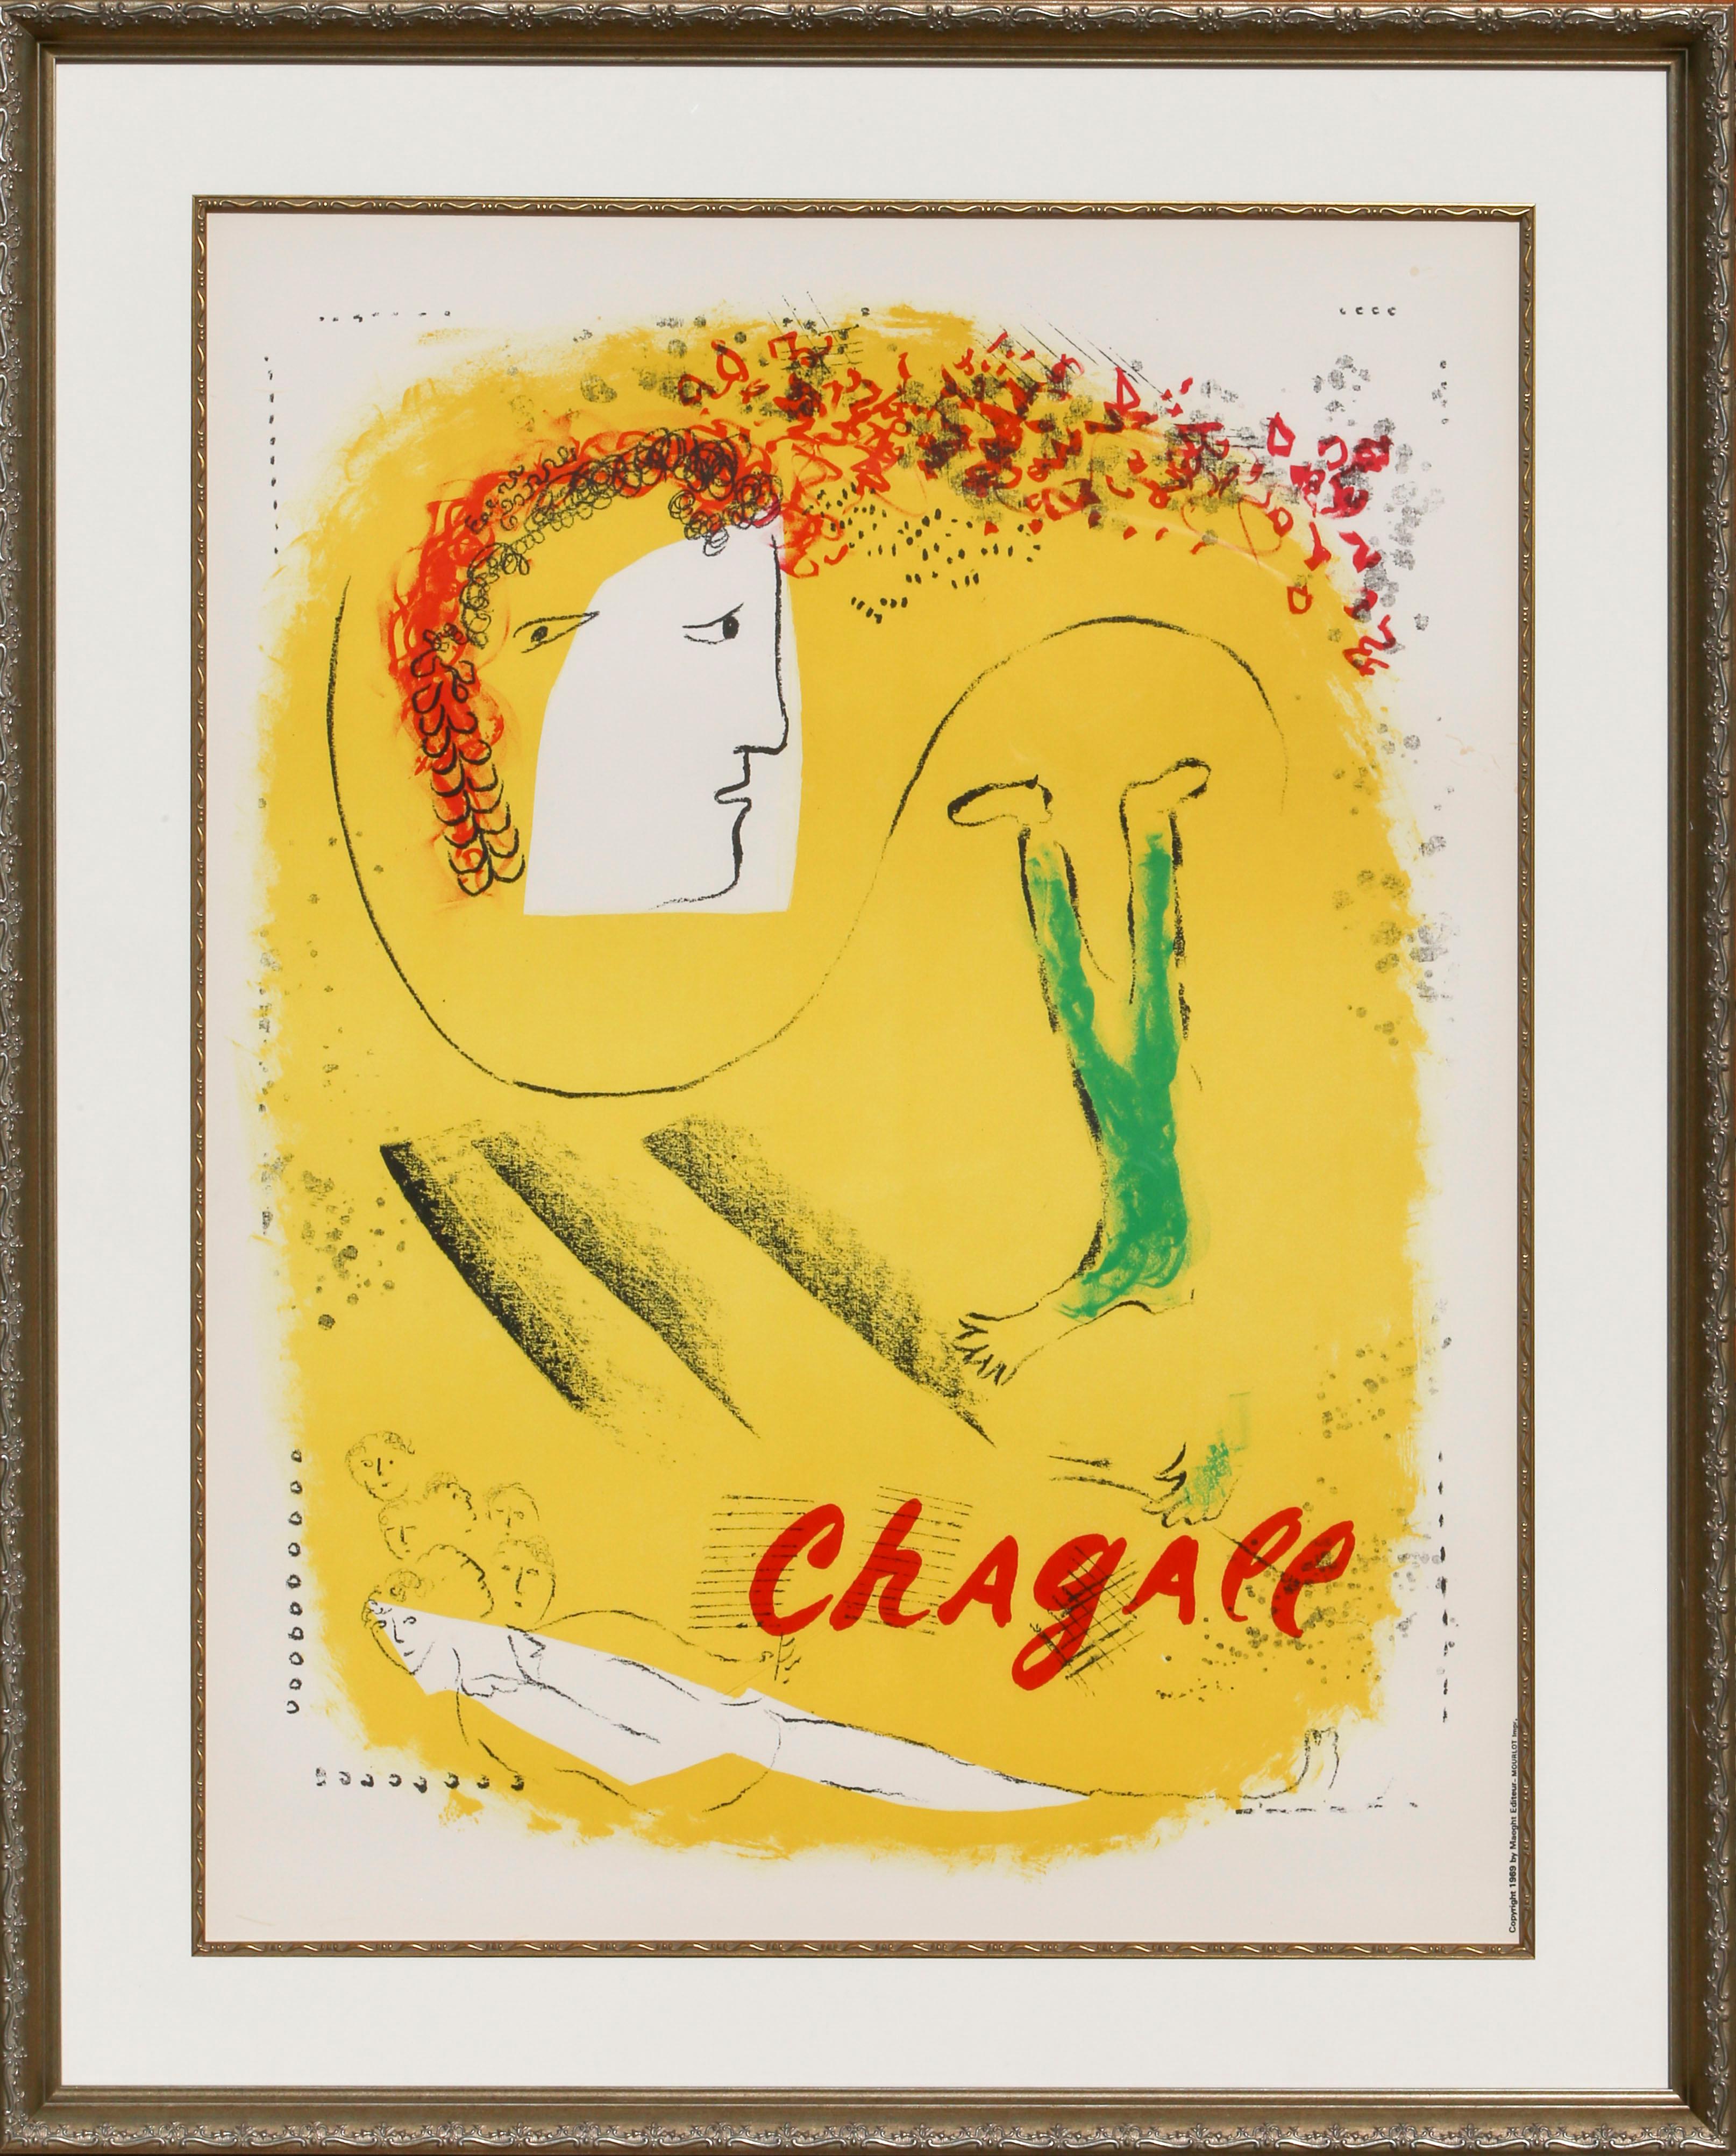 A bright yellow composition by Marc Chagall featuring a floating white head with red hair, an upside-down pair of green trousers, and a bright red signature by the artist in the plate. This aptly-named lithograph was originally designed to be a